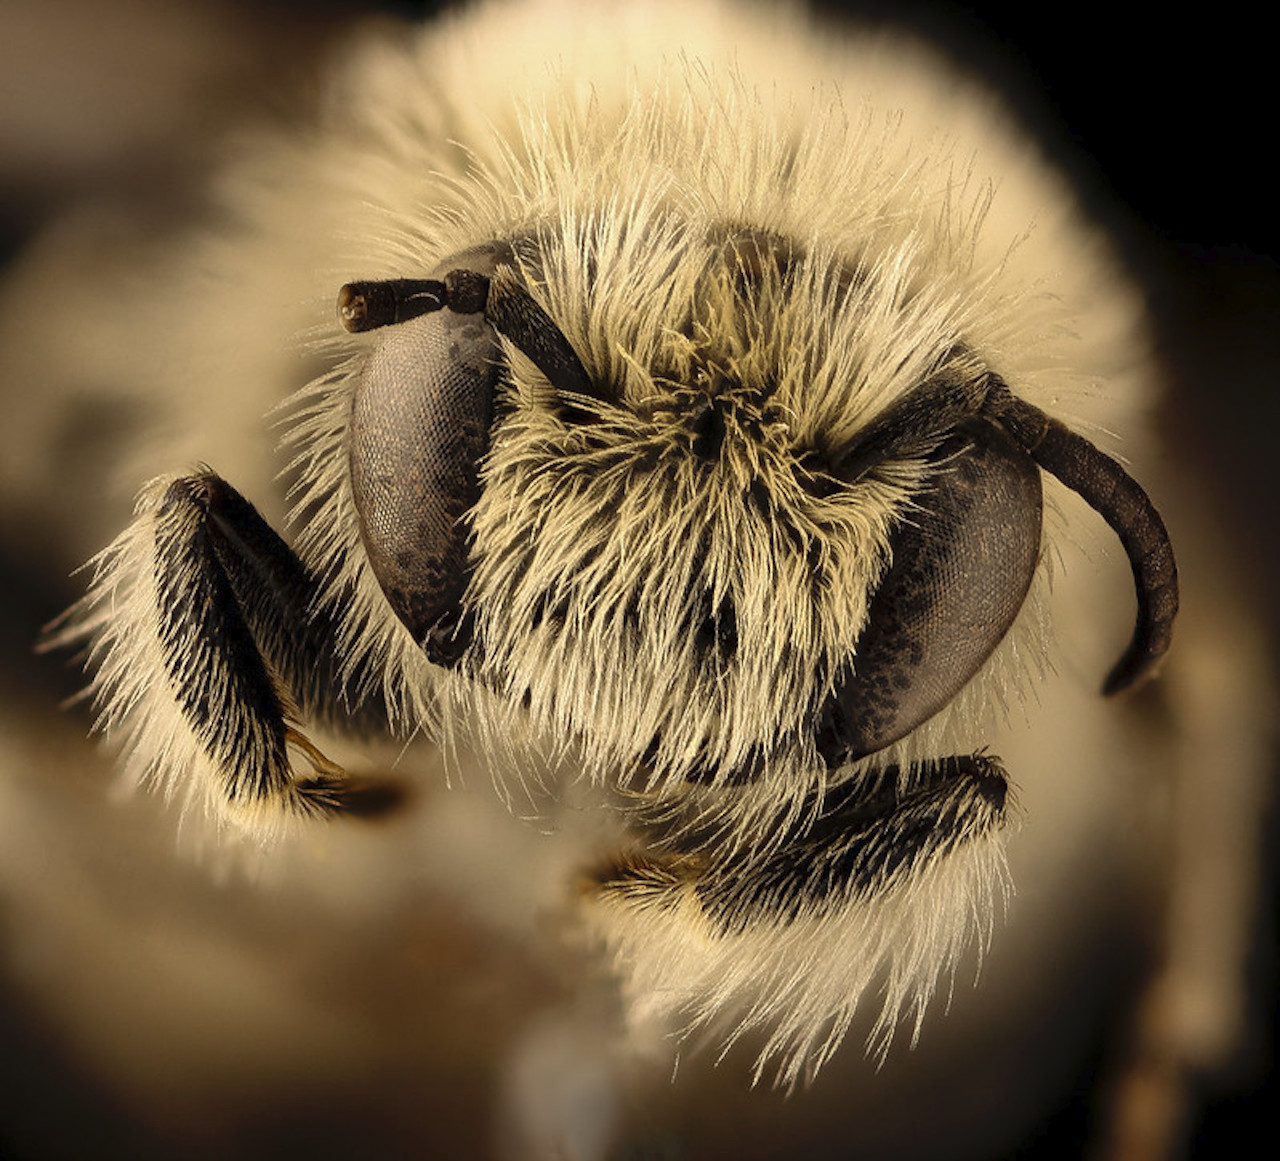 Beenome100 Project to Conserve Bees via Genetic Mapping